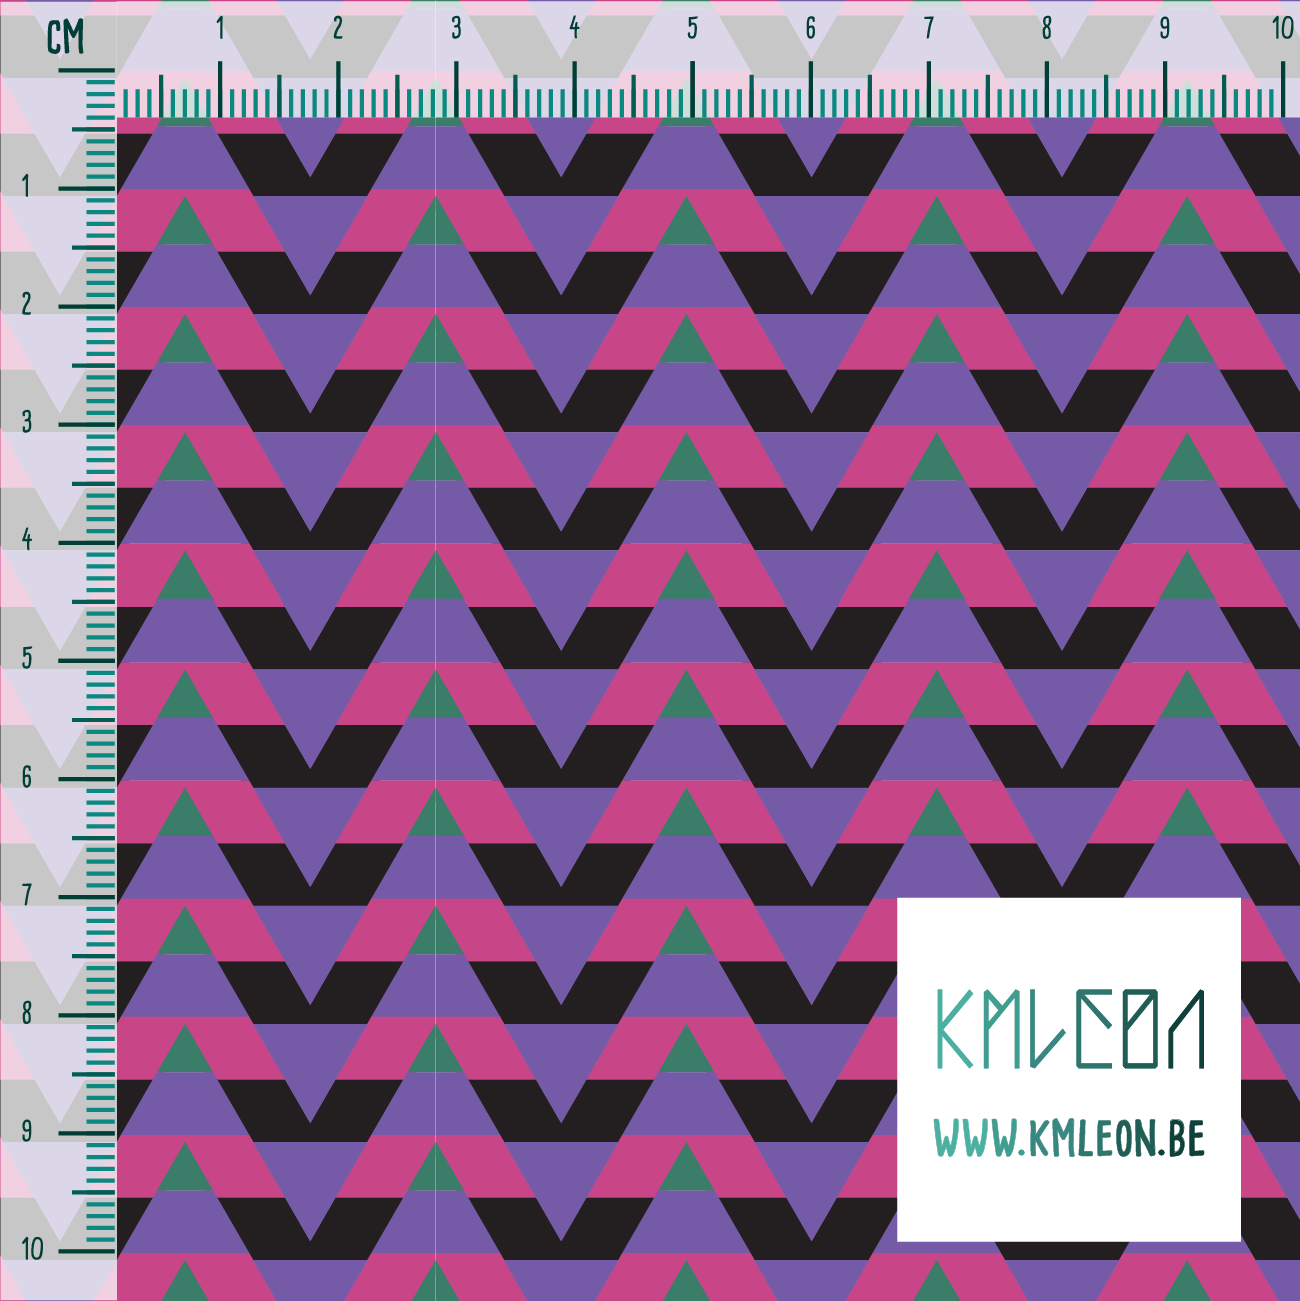 Striped triangles in pink, green, black and purple fabric